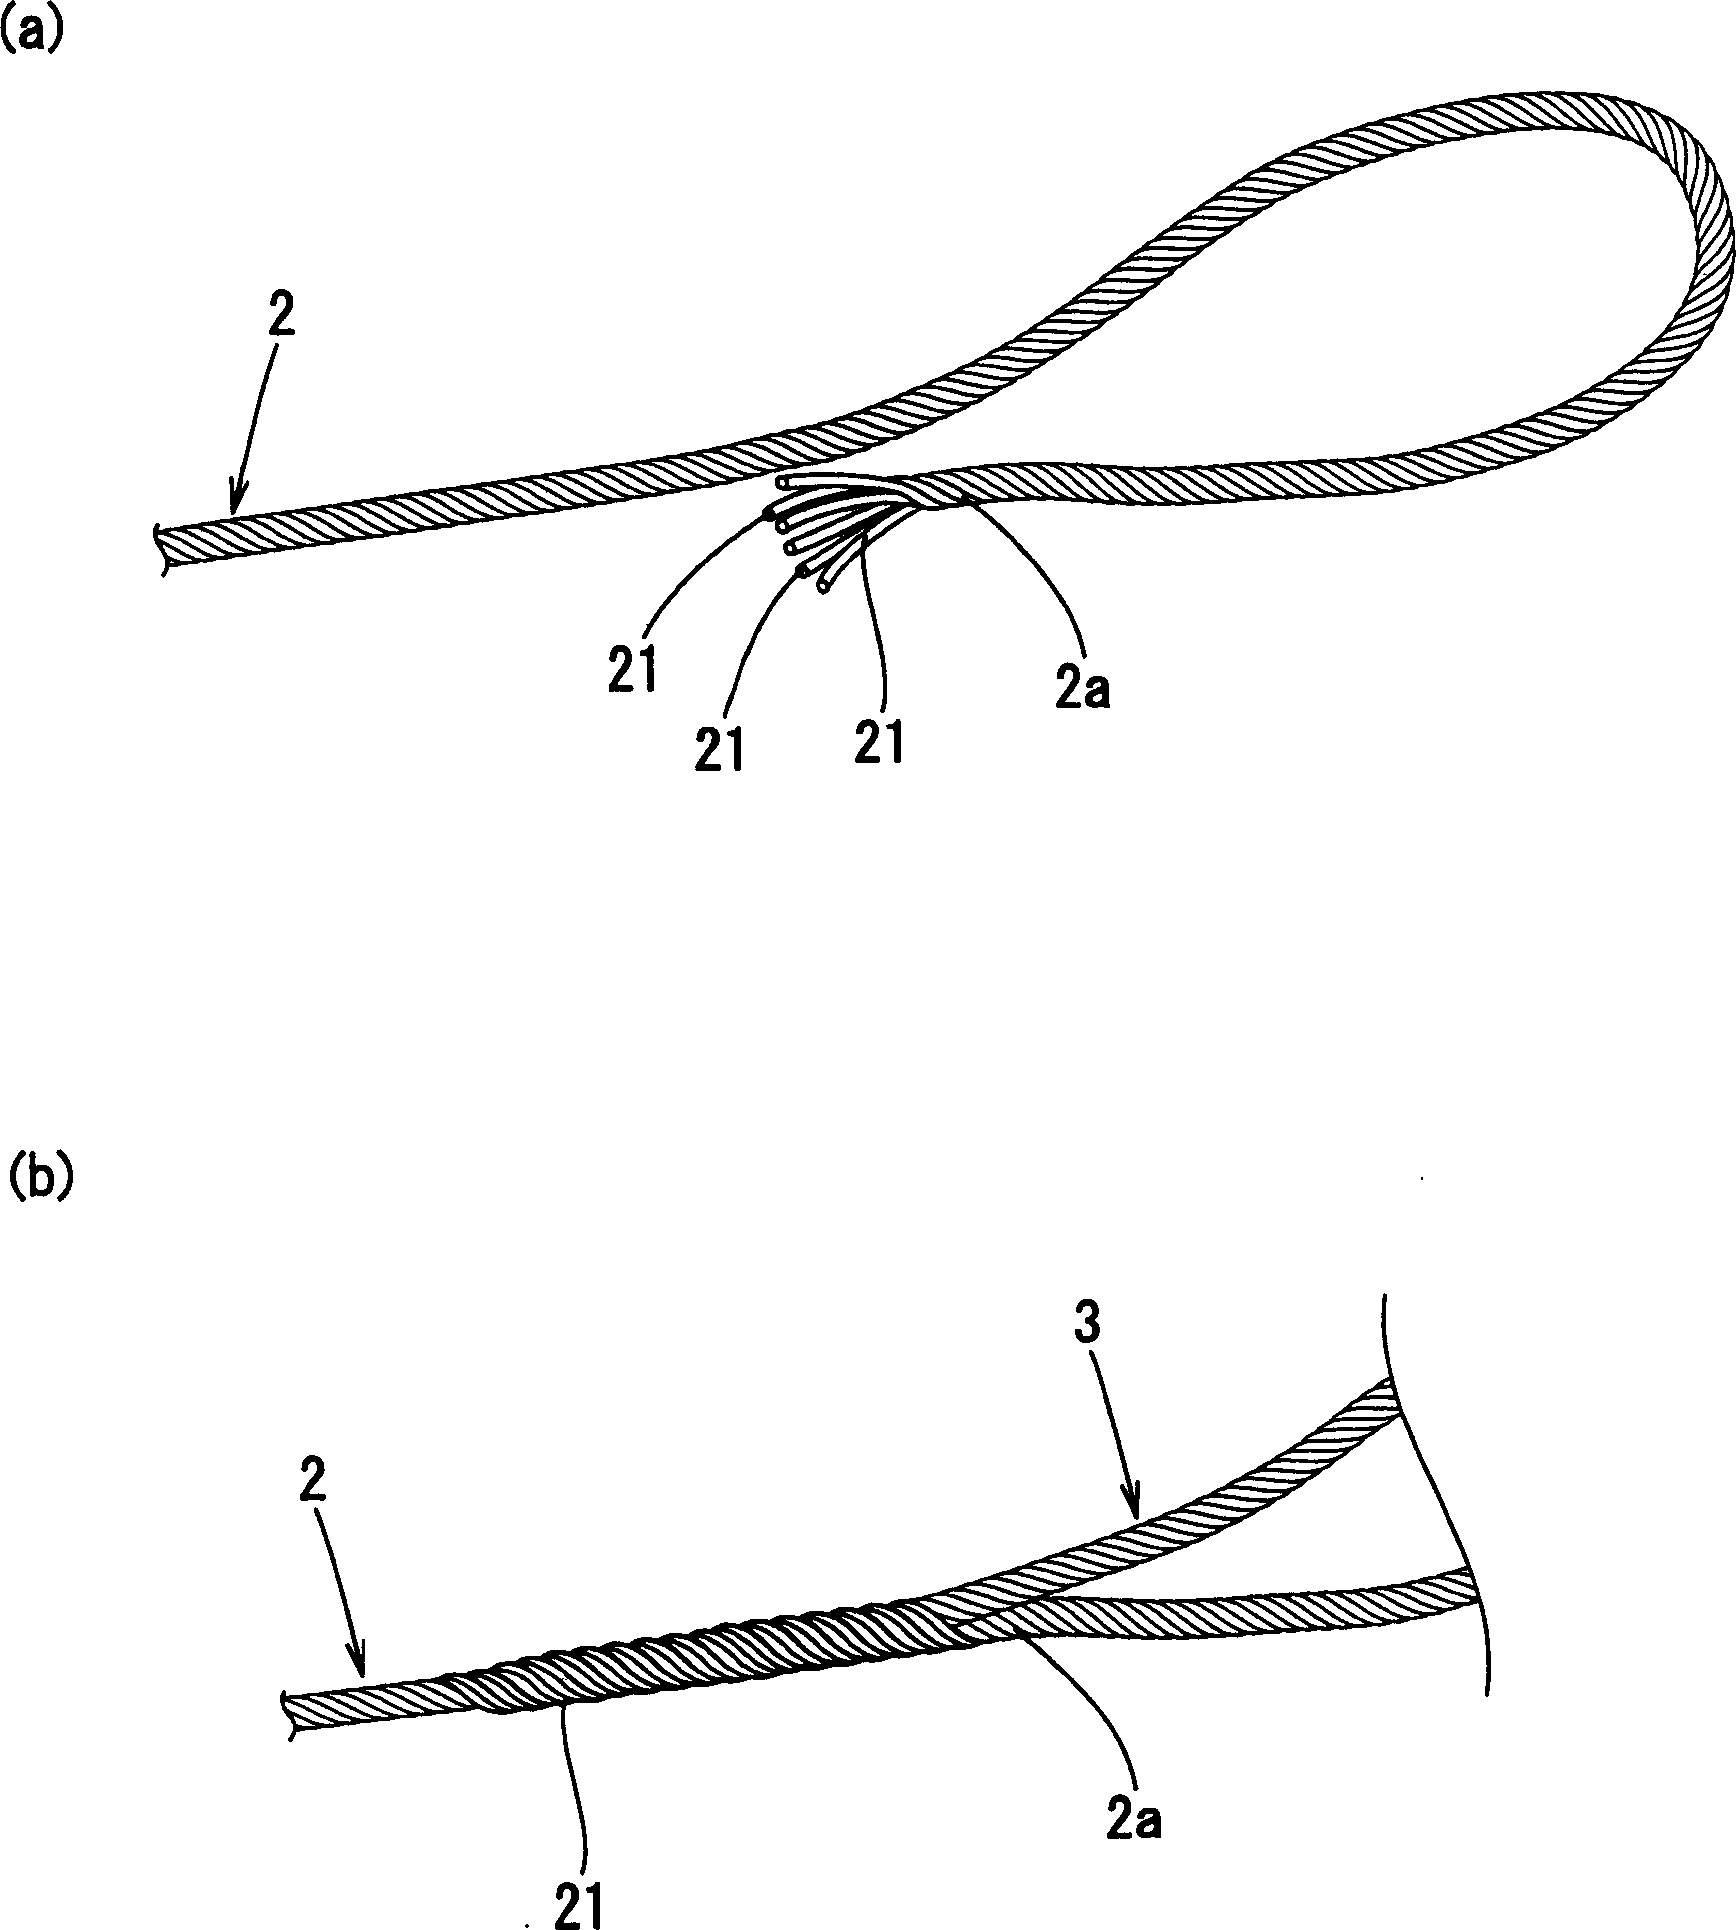 Treating structure for sling rope weaving and inserting terminal